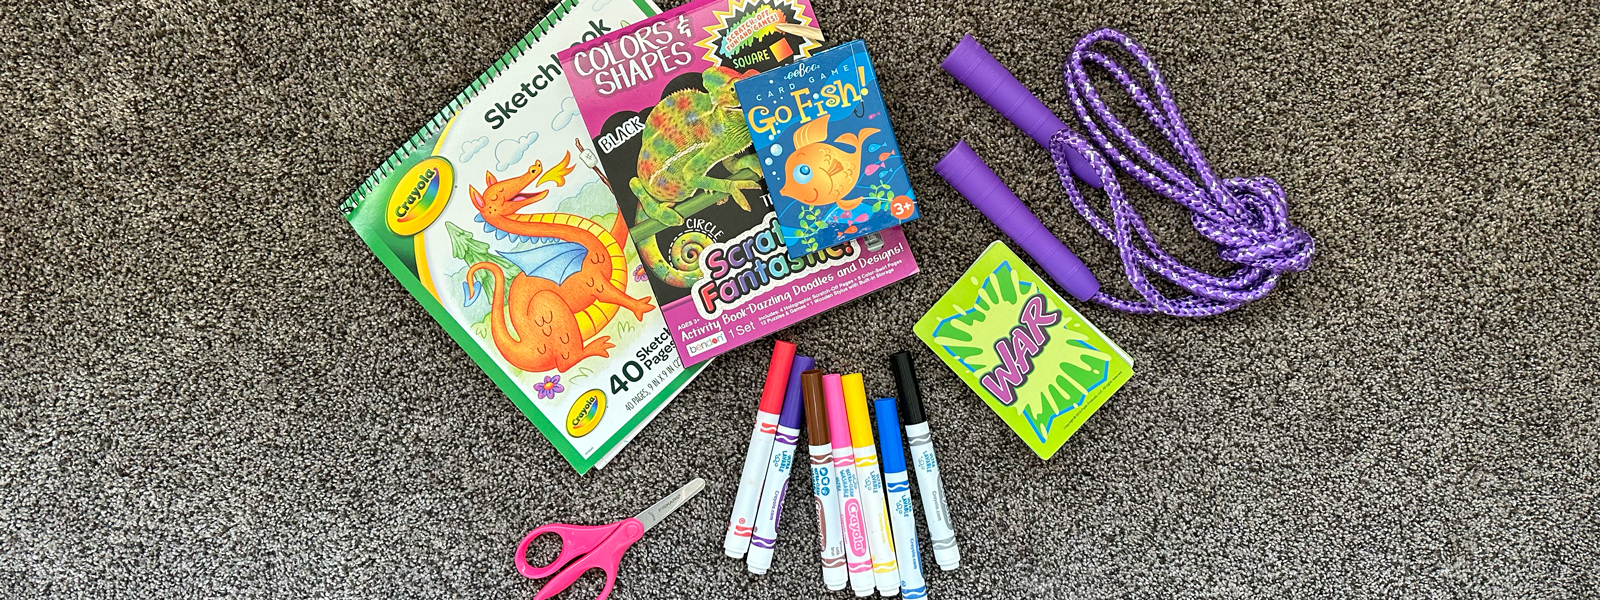 image of markers, coloring books, games, and a jump rope